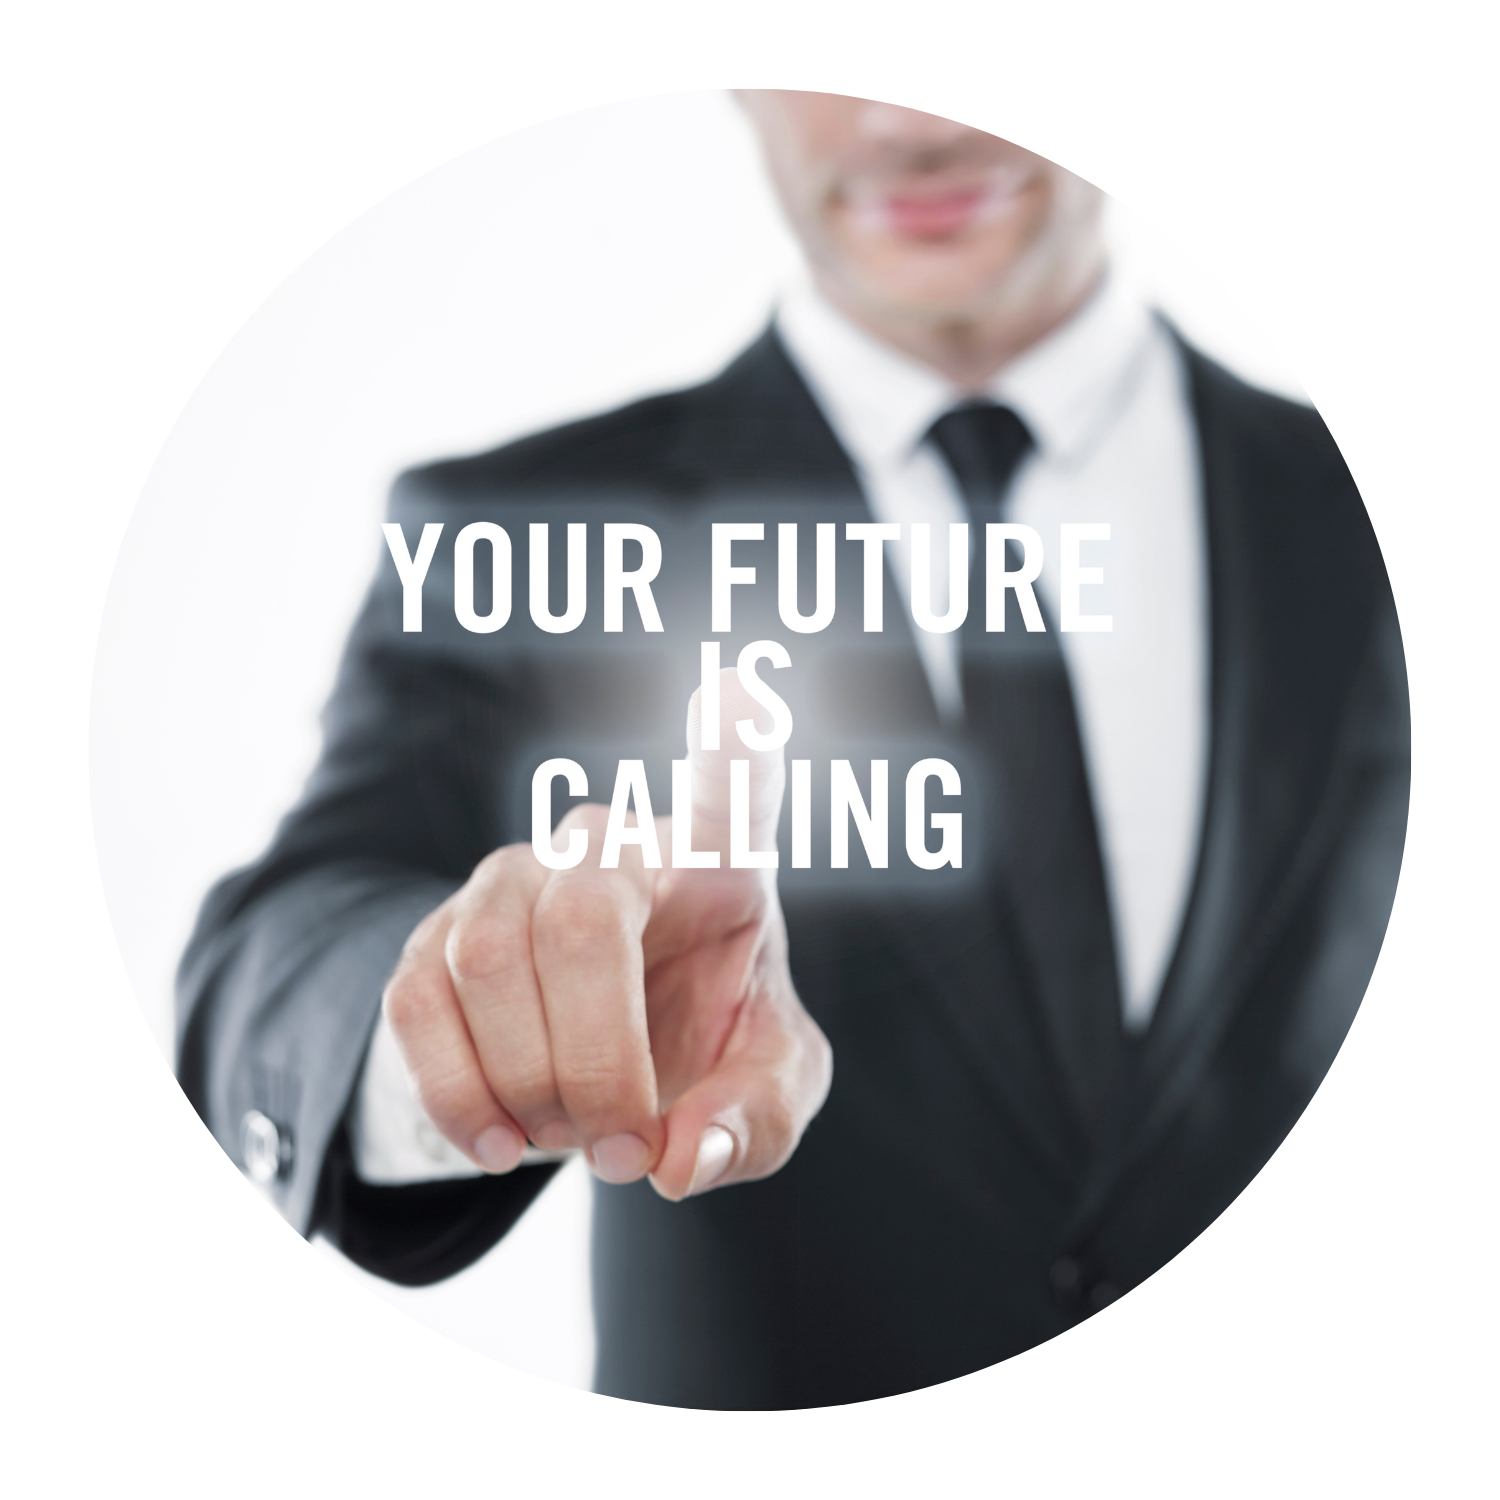 It’s Your Future Self Calling with a Message